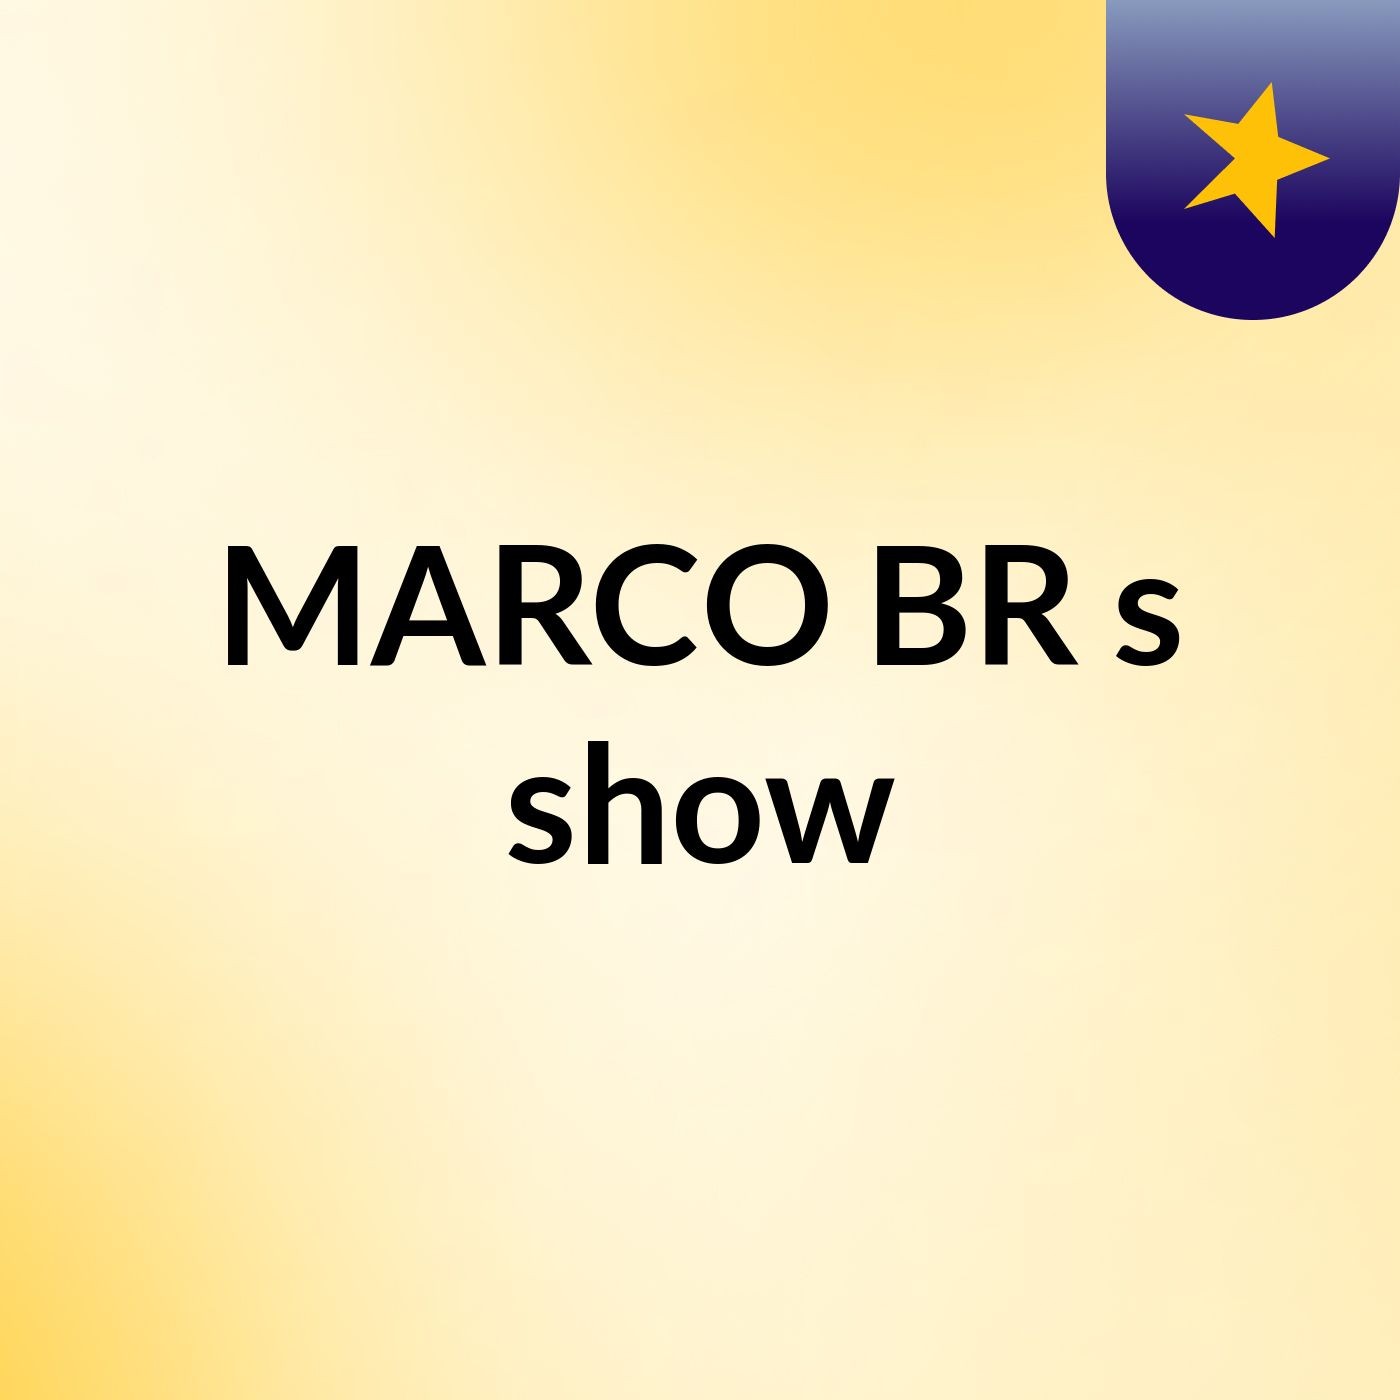 MARCO BR's show